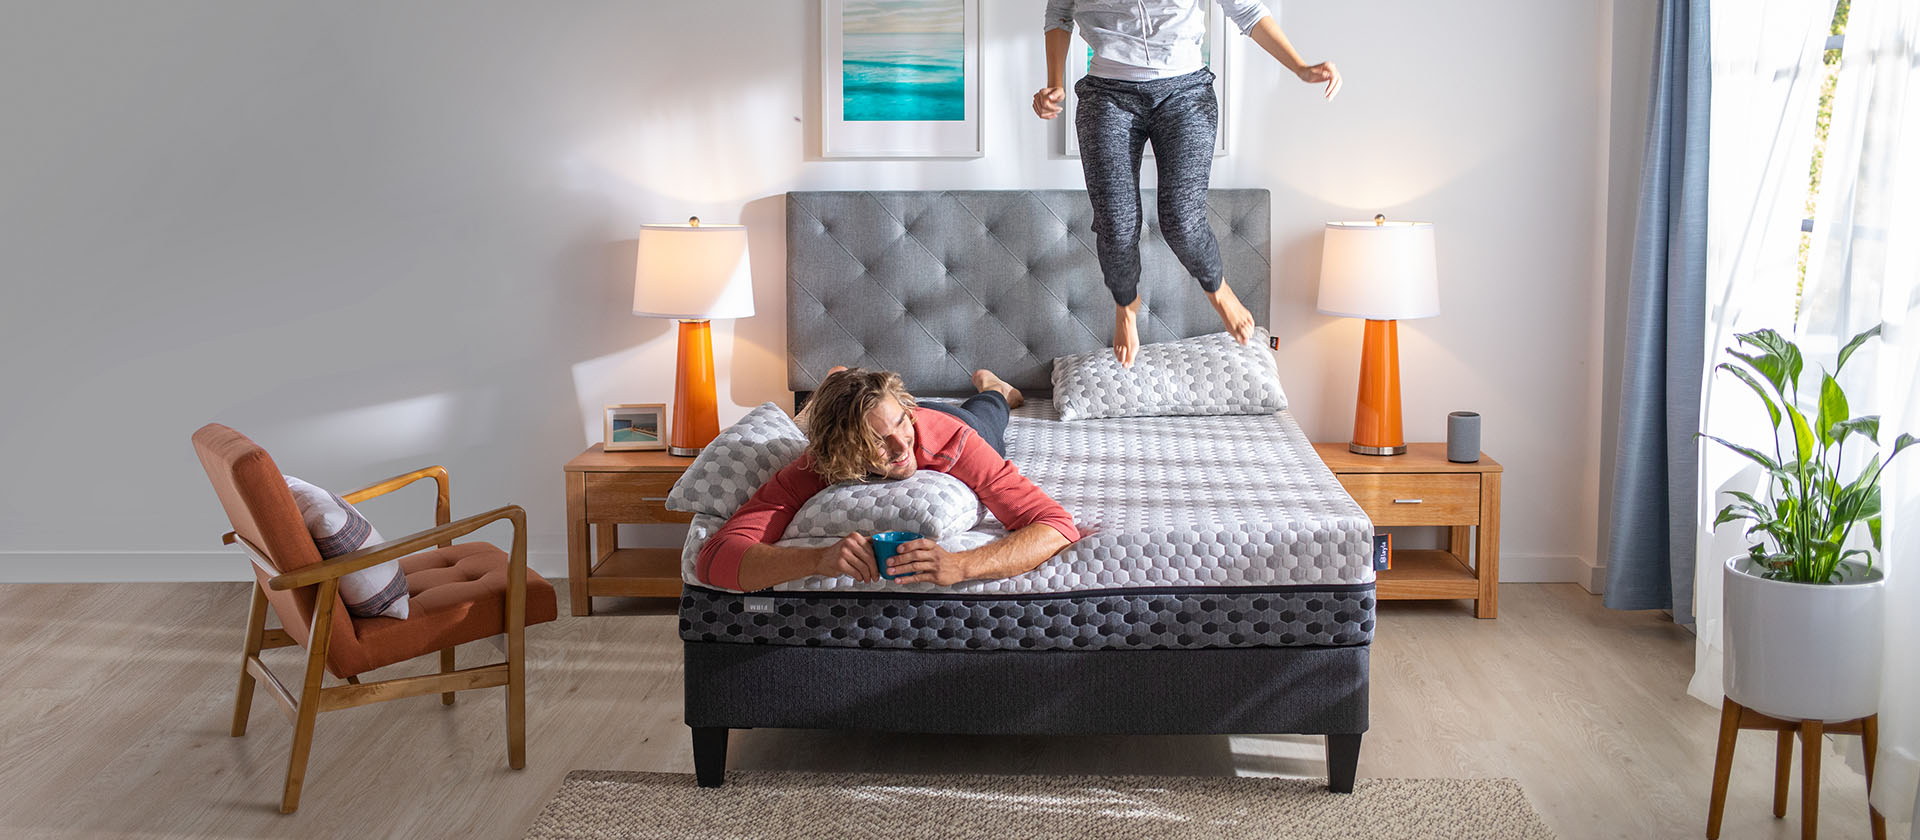 Woman jumping on a bed with man laying on his stomach